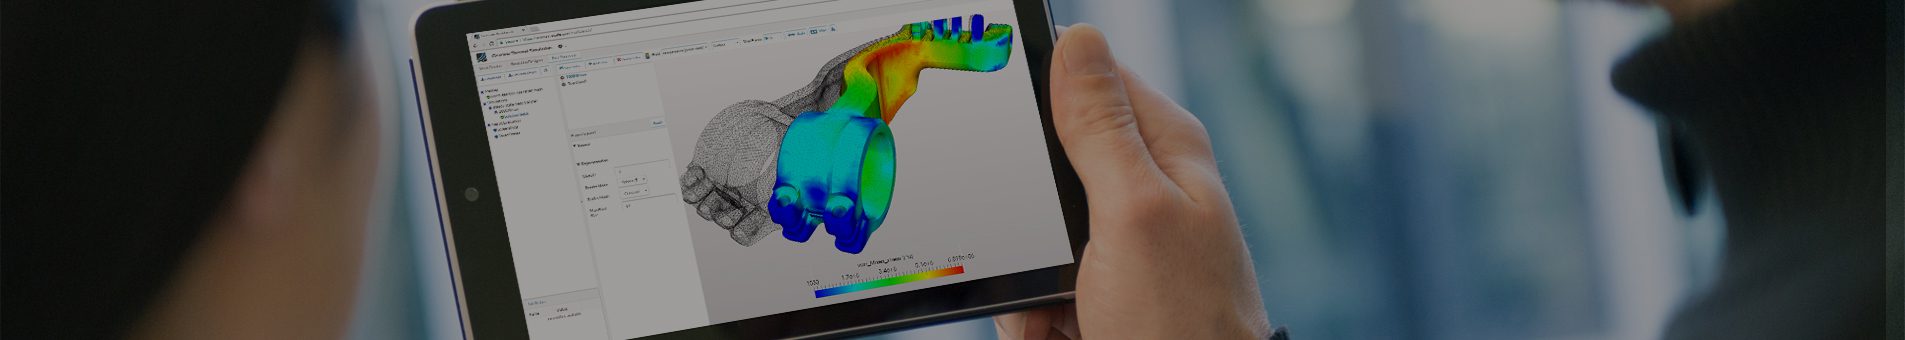 FEA Software SimScale product